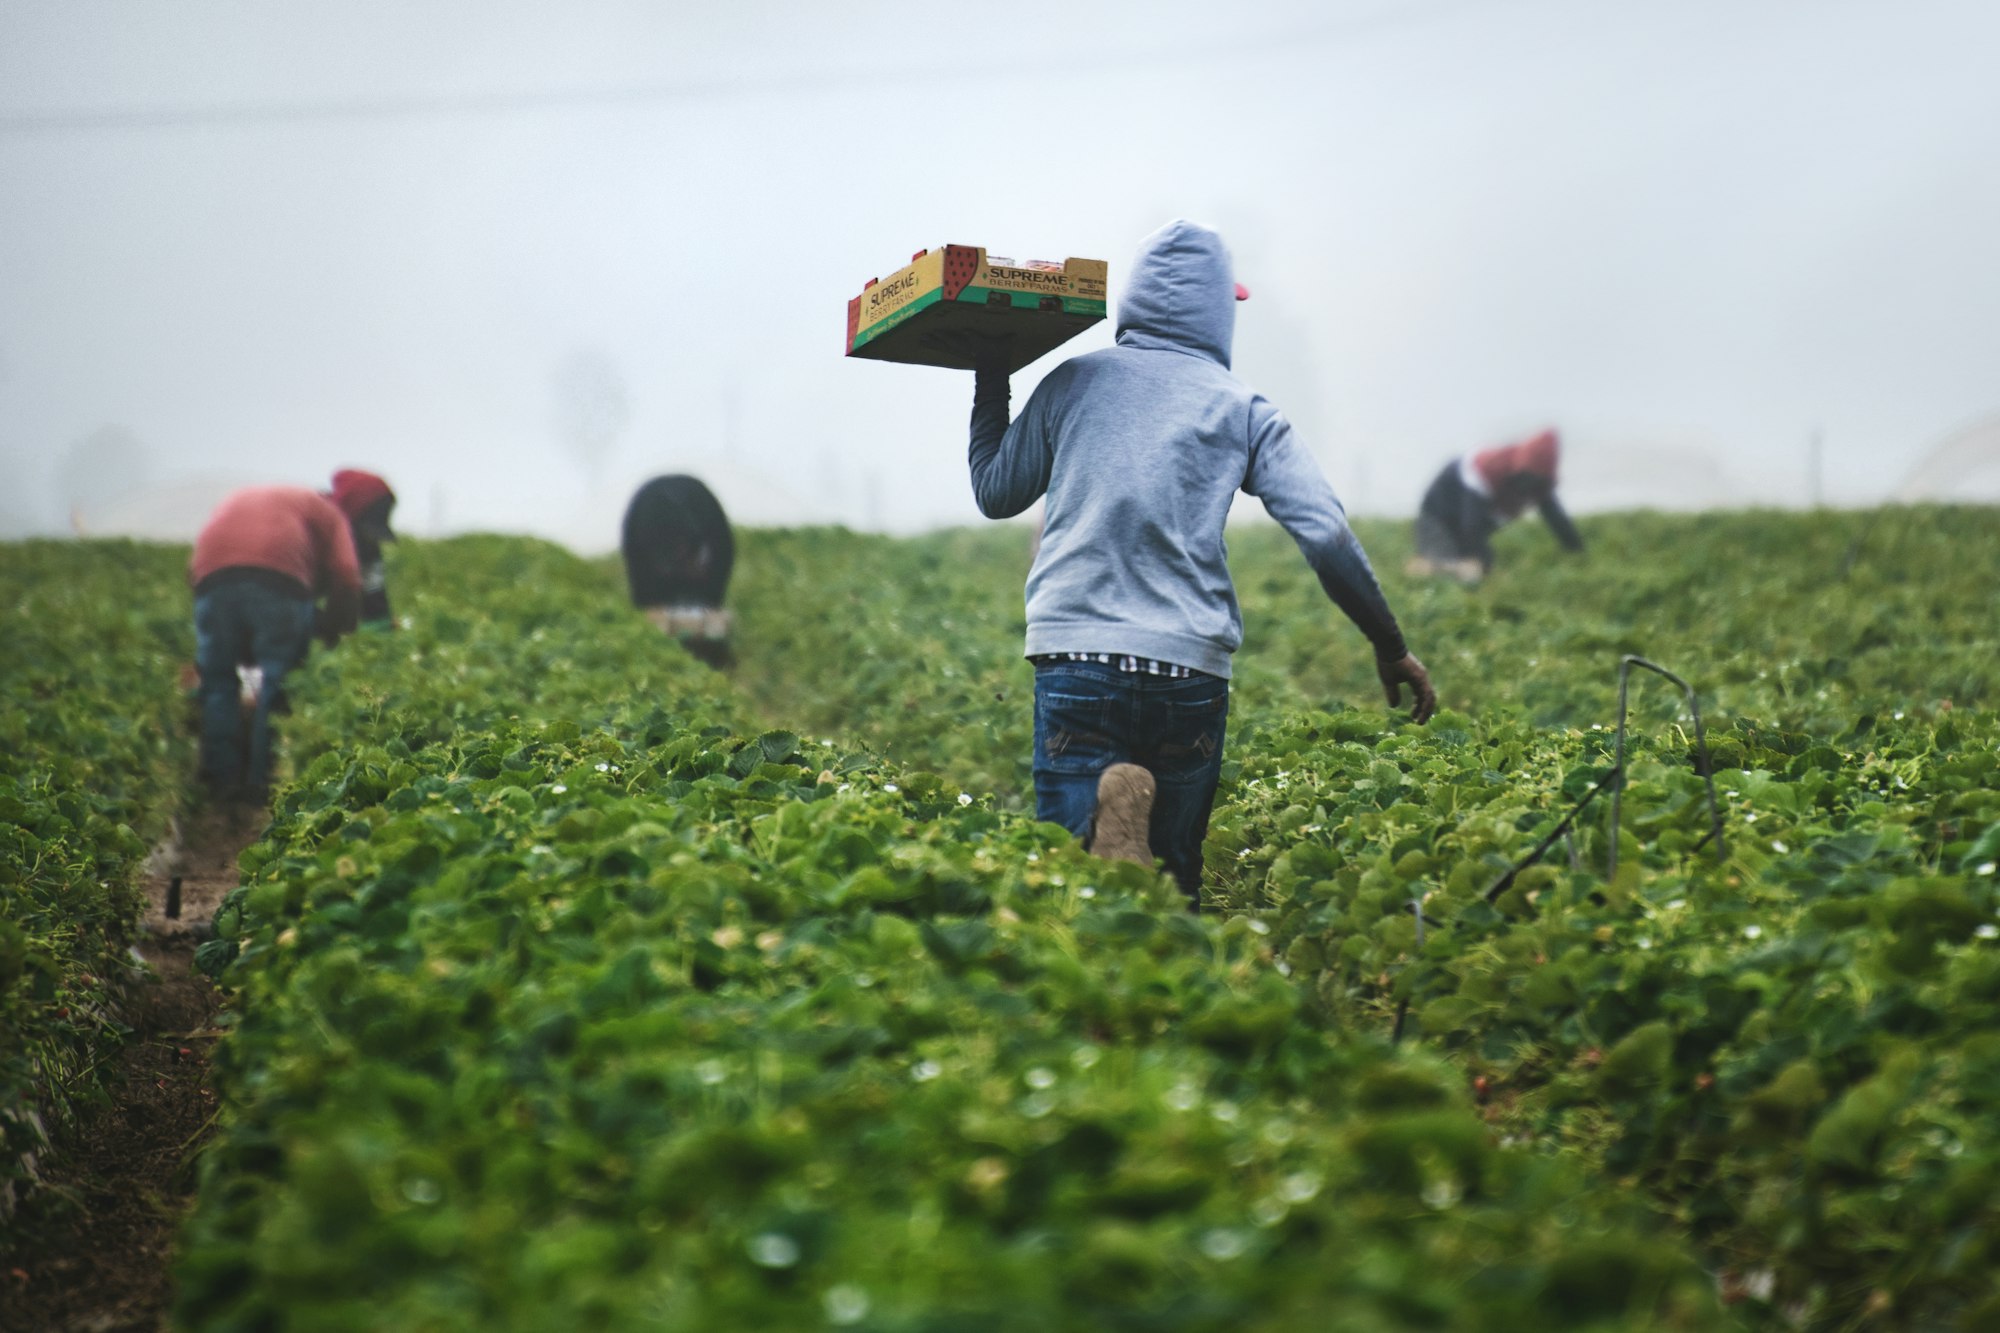 Fast Strawberries  |  When strawberries are harvested, the pickers are paid by the box, so they run with their filled boxes to ensure they can pick as many as possible and earn enough money during harvest season. Be thankful for those who get food to our tables. 